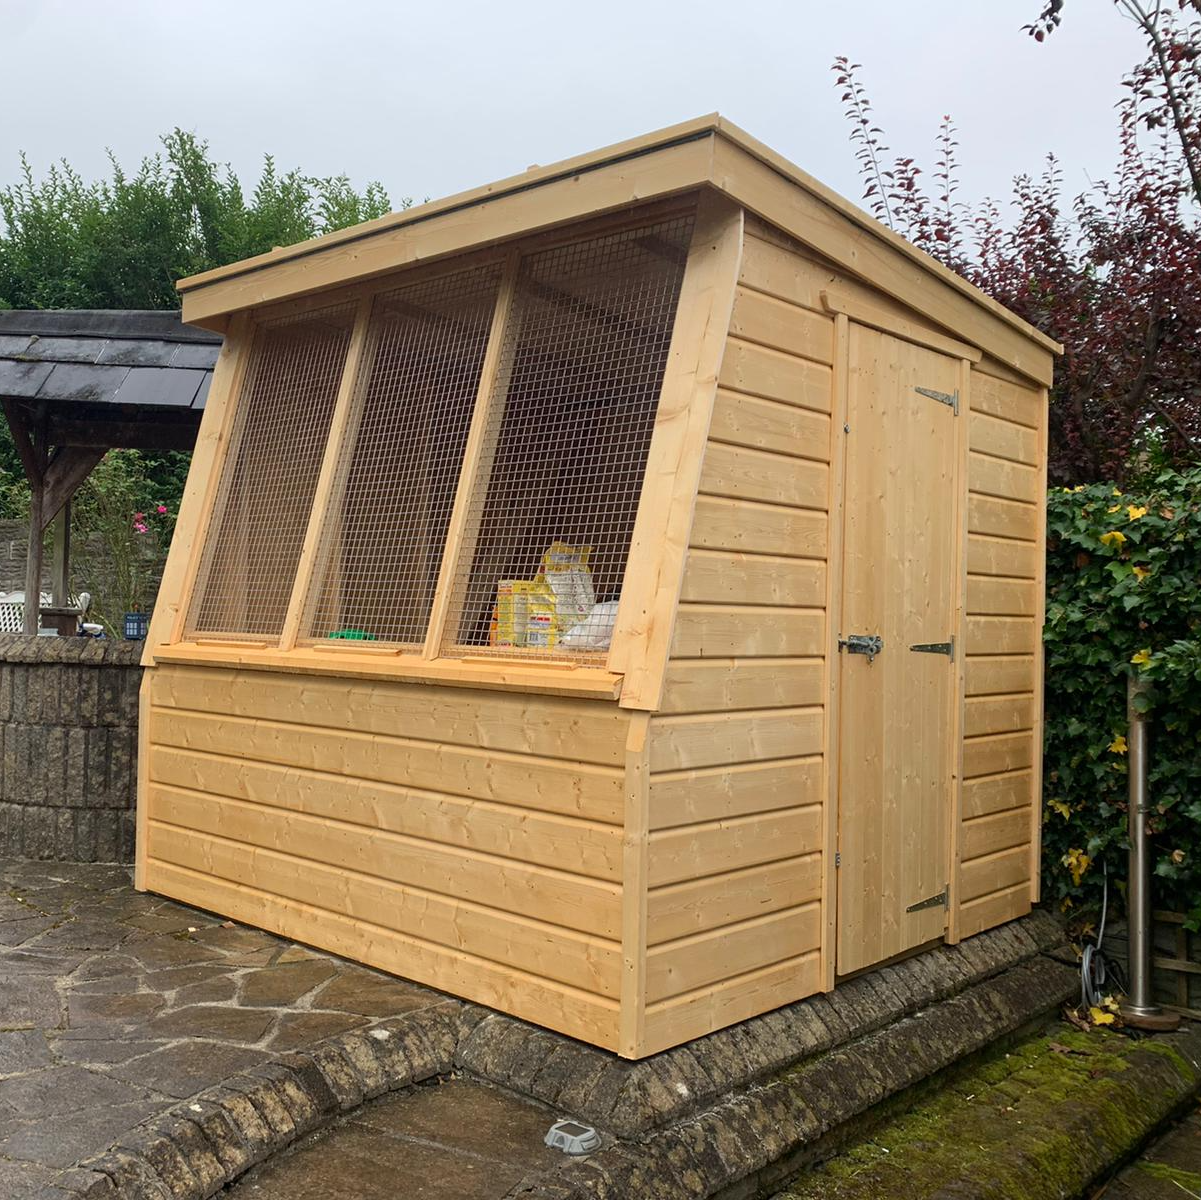 potting shed used as a cattery for a cat rescue place in Bryncoch. Mesh instead of the perspex but option to put perspex over the top during the bad weather so it can still be used.